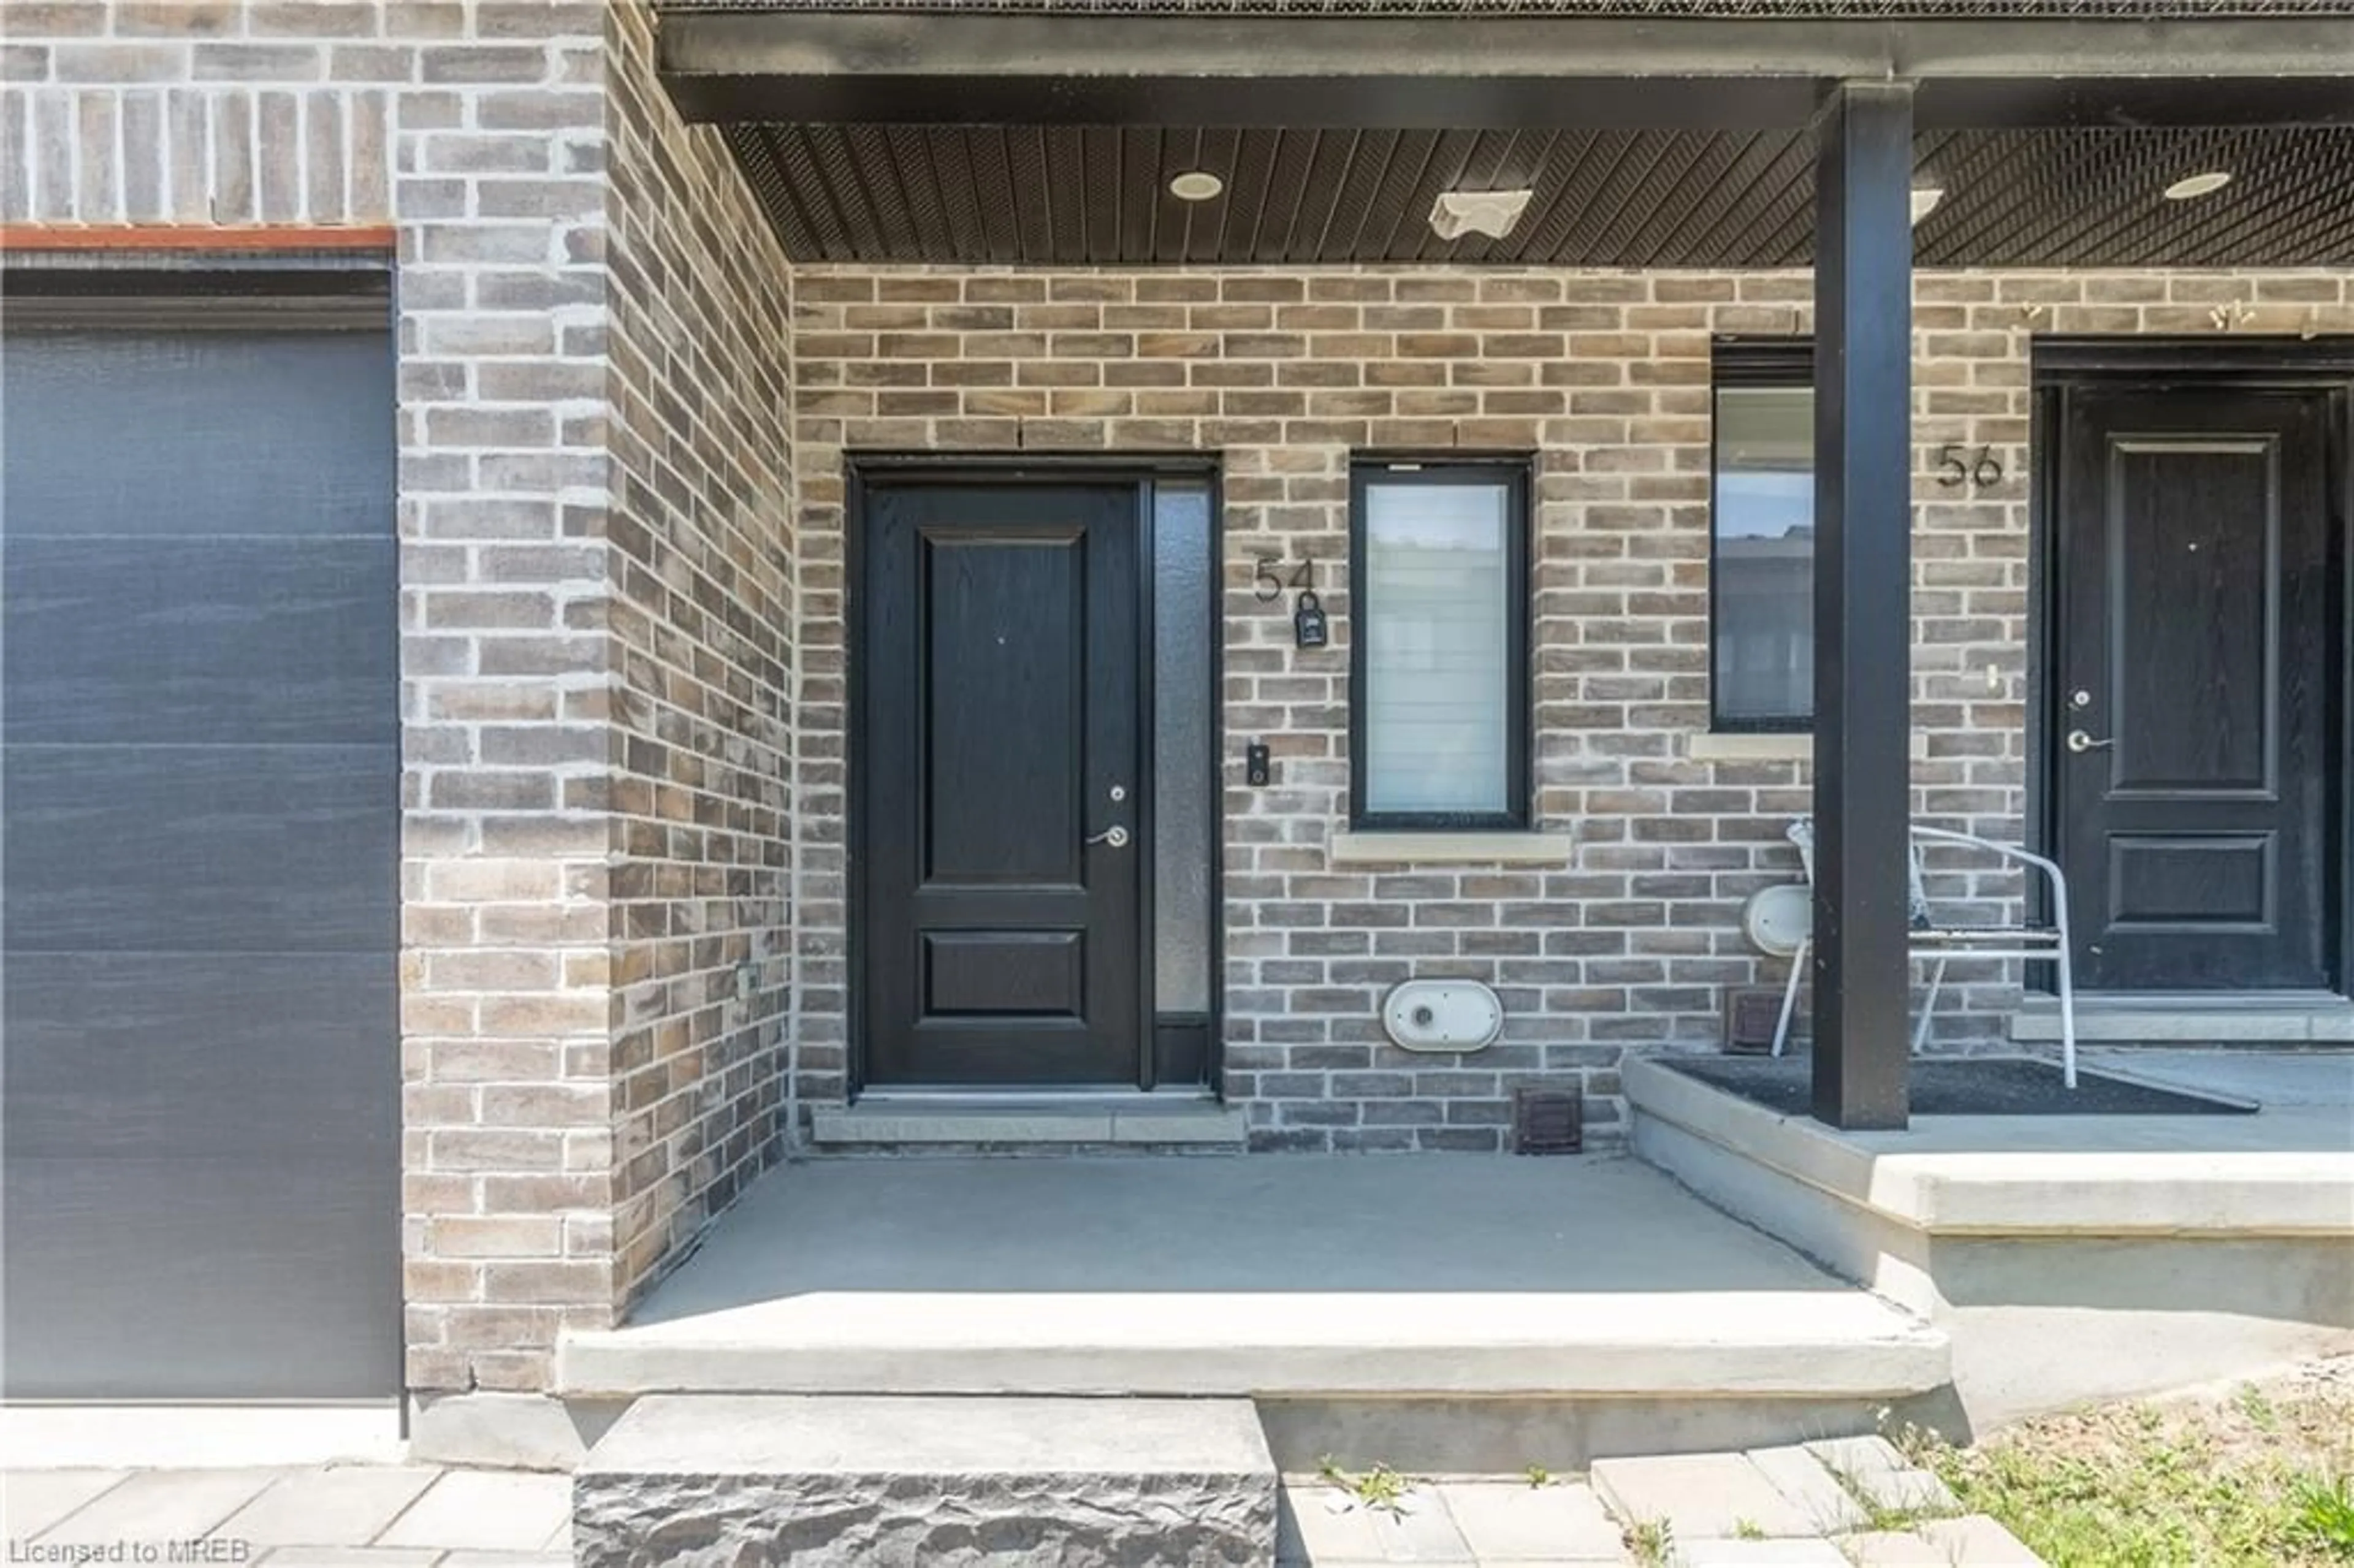 Home with brick exterior material for 811 Sarnia Rd #54, London Ontario N6H 5J9